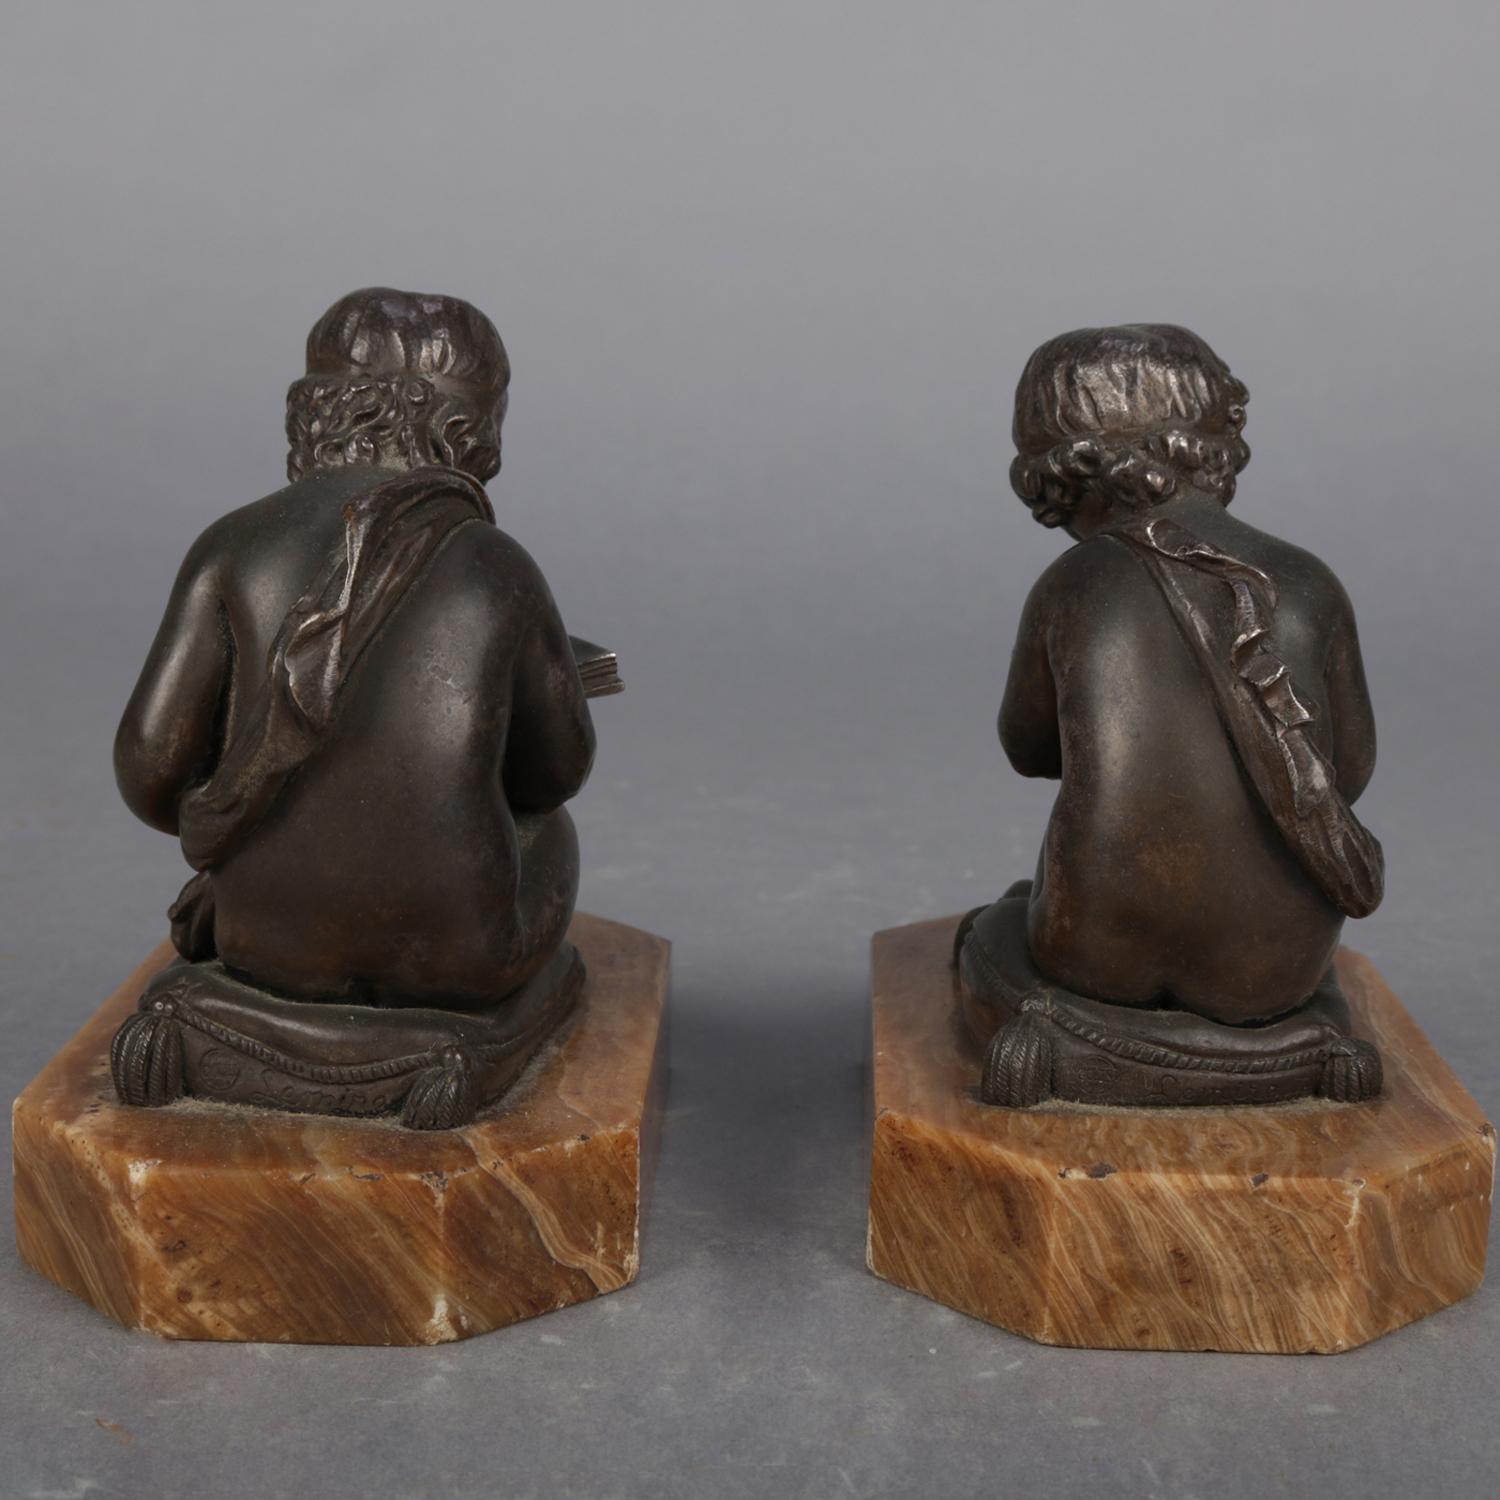 Cast Antique French Bronze Sculpture Bookends after Charles Lemire, circa 1910